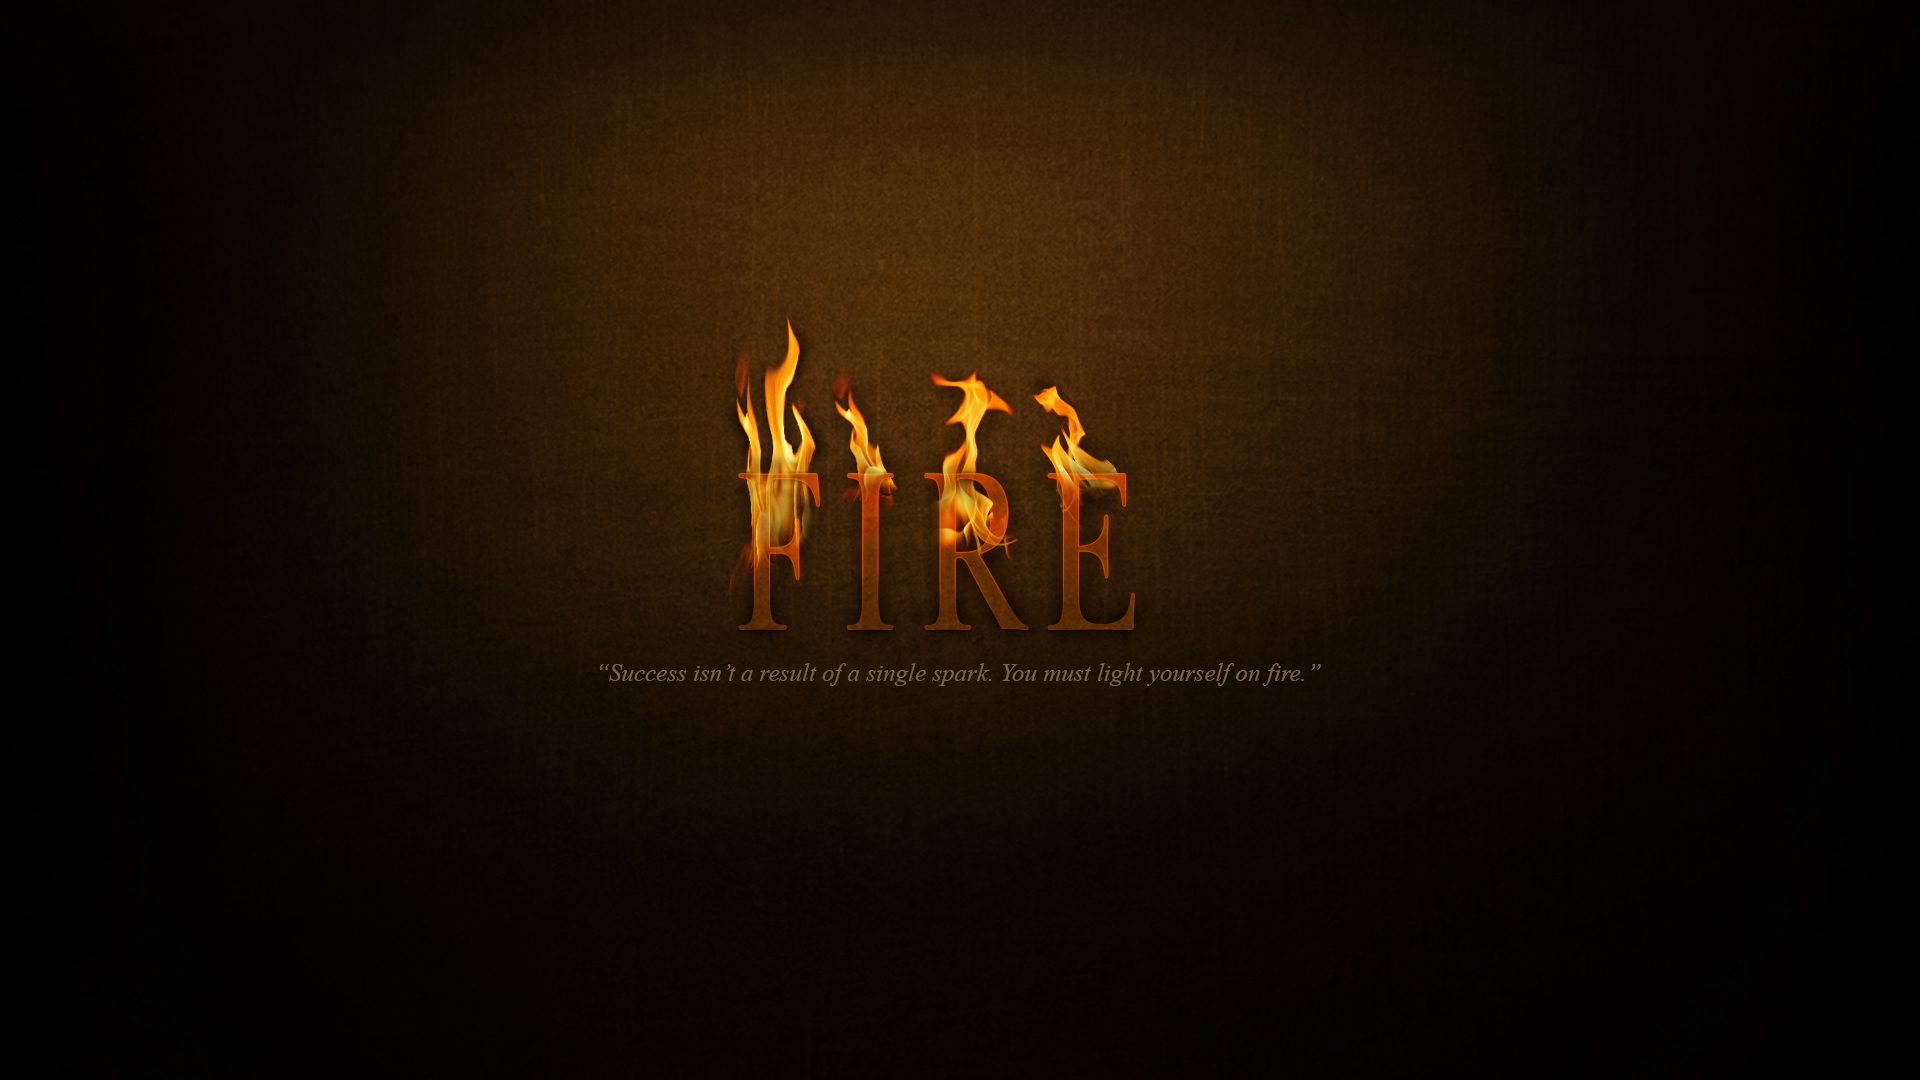 motivational quotes wallpapers for desktop hd,font,flame,fire,event,heat